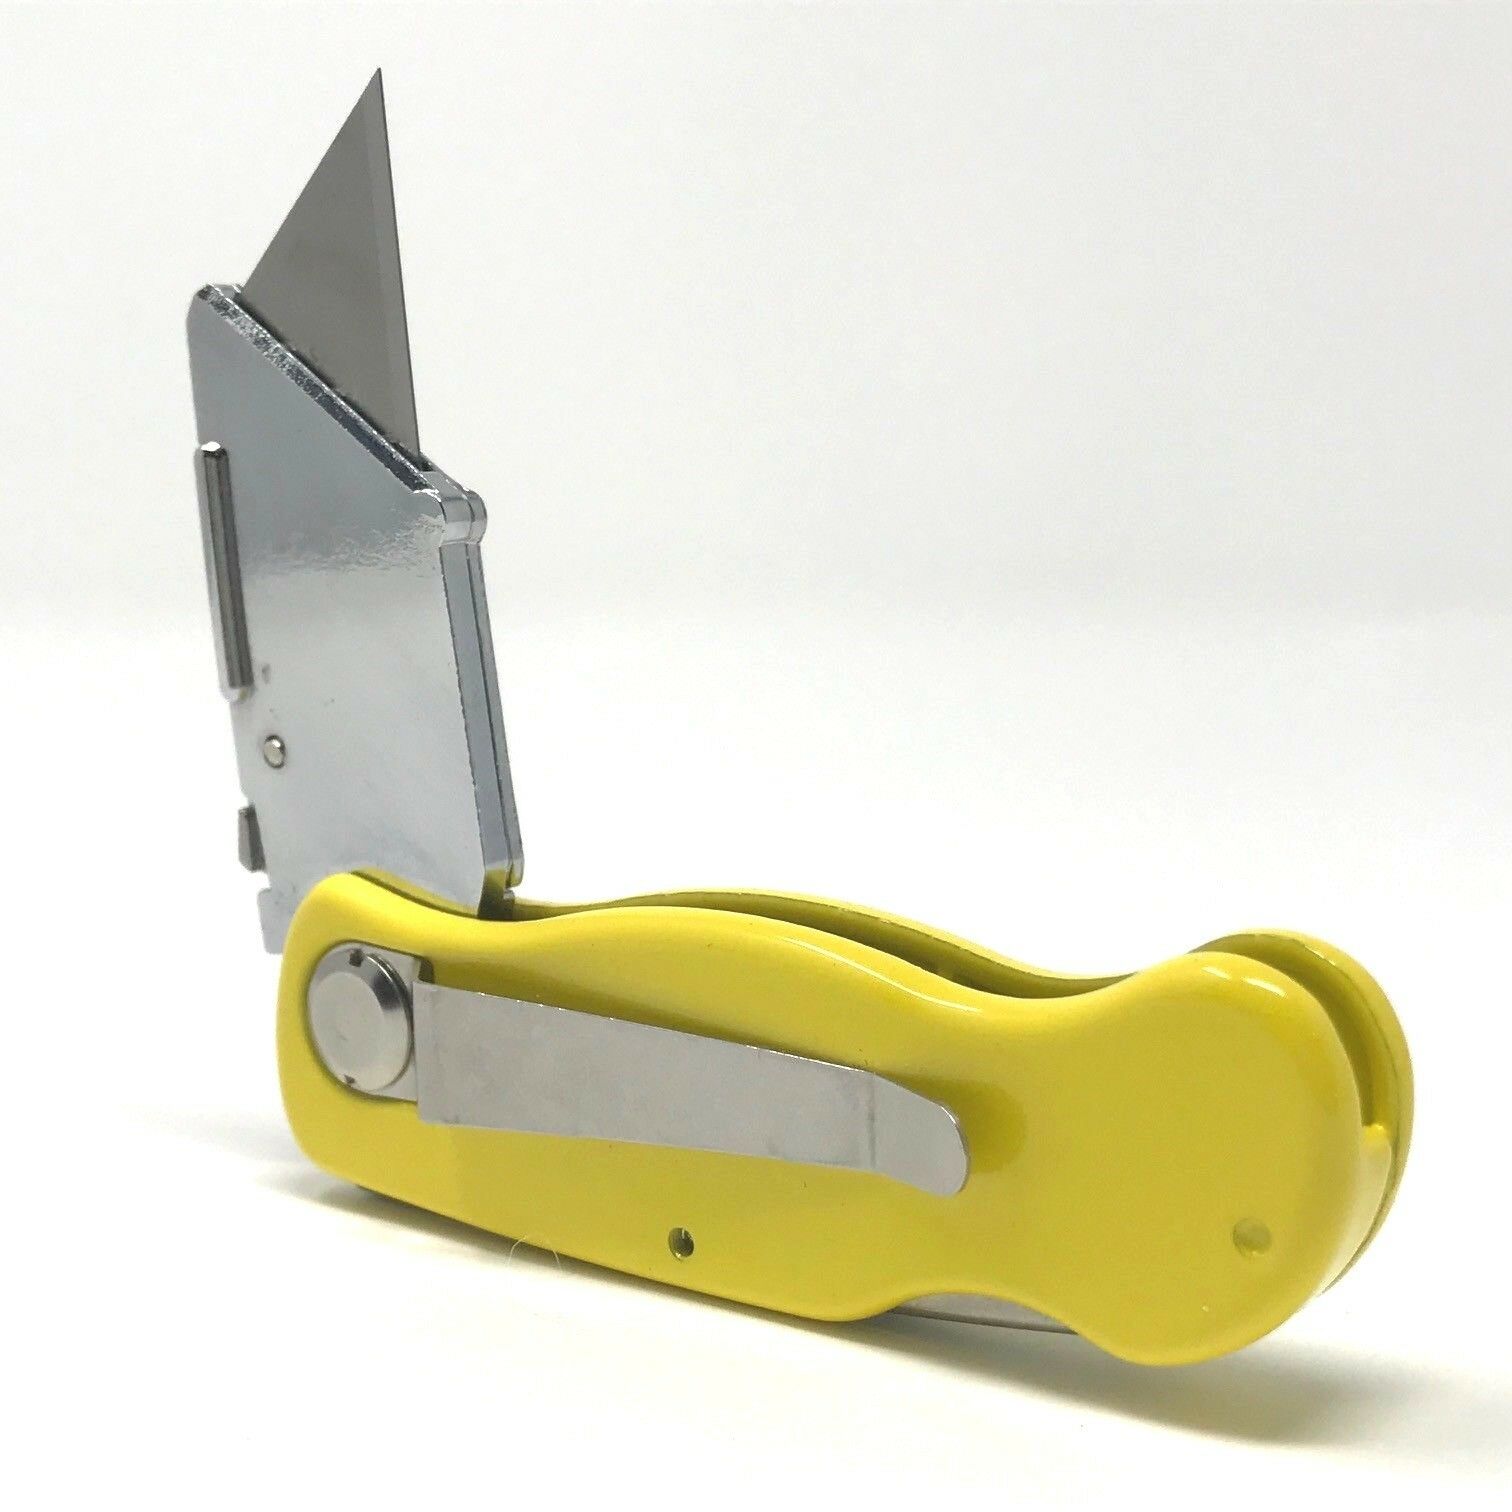 Folding Utility Pocket Knife Box Cutter With Lock Blade Yellow 6 Blades